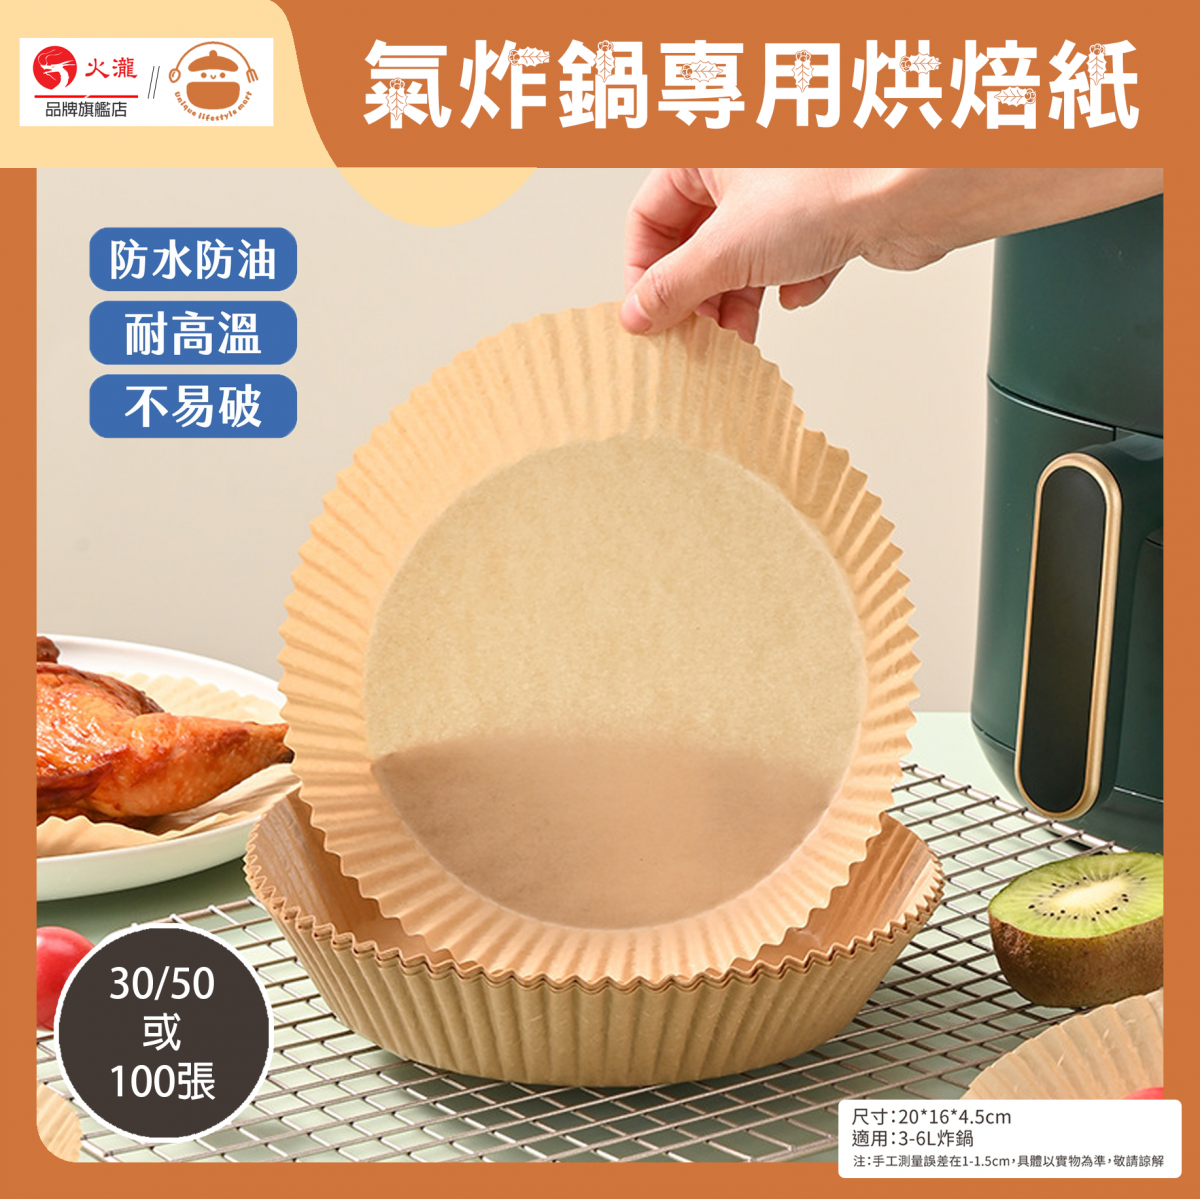 Disposable paper tray for air fryer【50 sheets】- Oil-absorbing paper | Baking paper | Anti-stick food